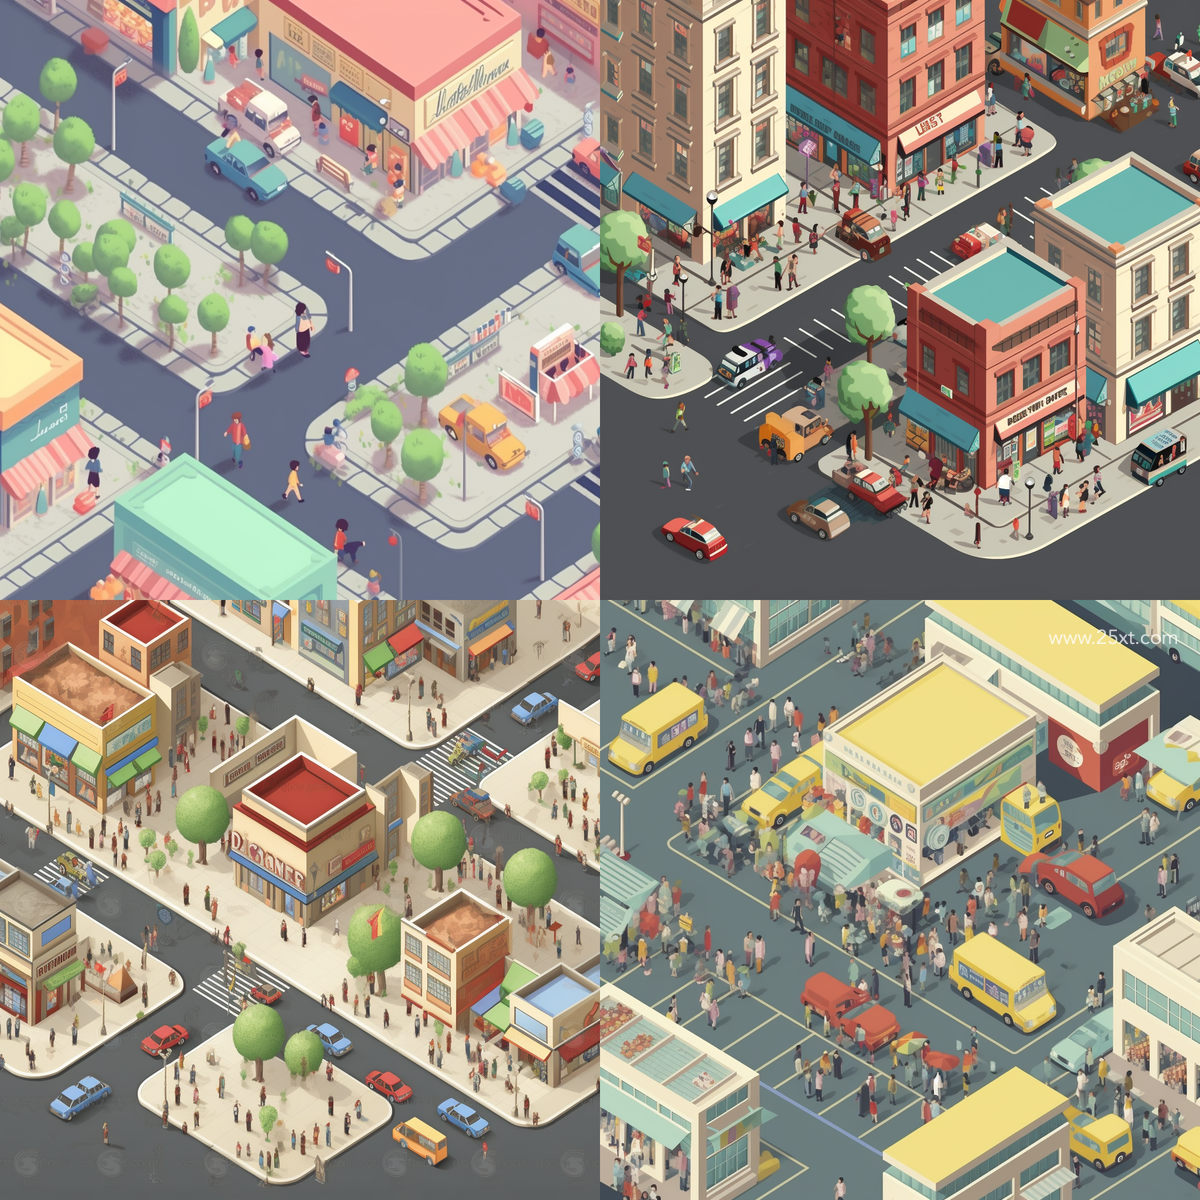 Yao_an_isometric_city__people_are_shopping._the_background_1d3dca4f-9c7d-4b9c-8a25-342b1e9b0bac.jpg